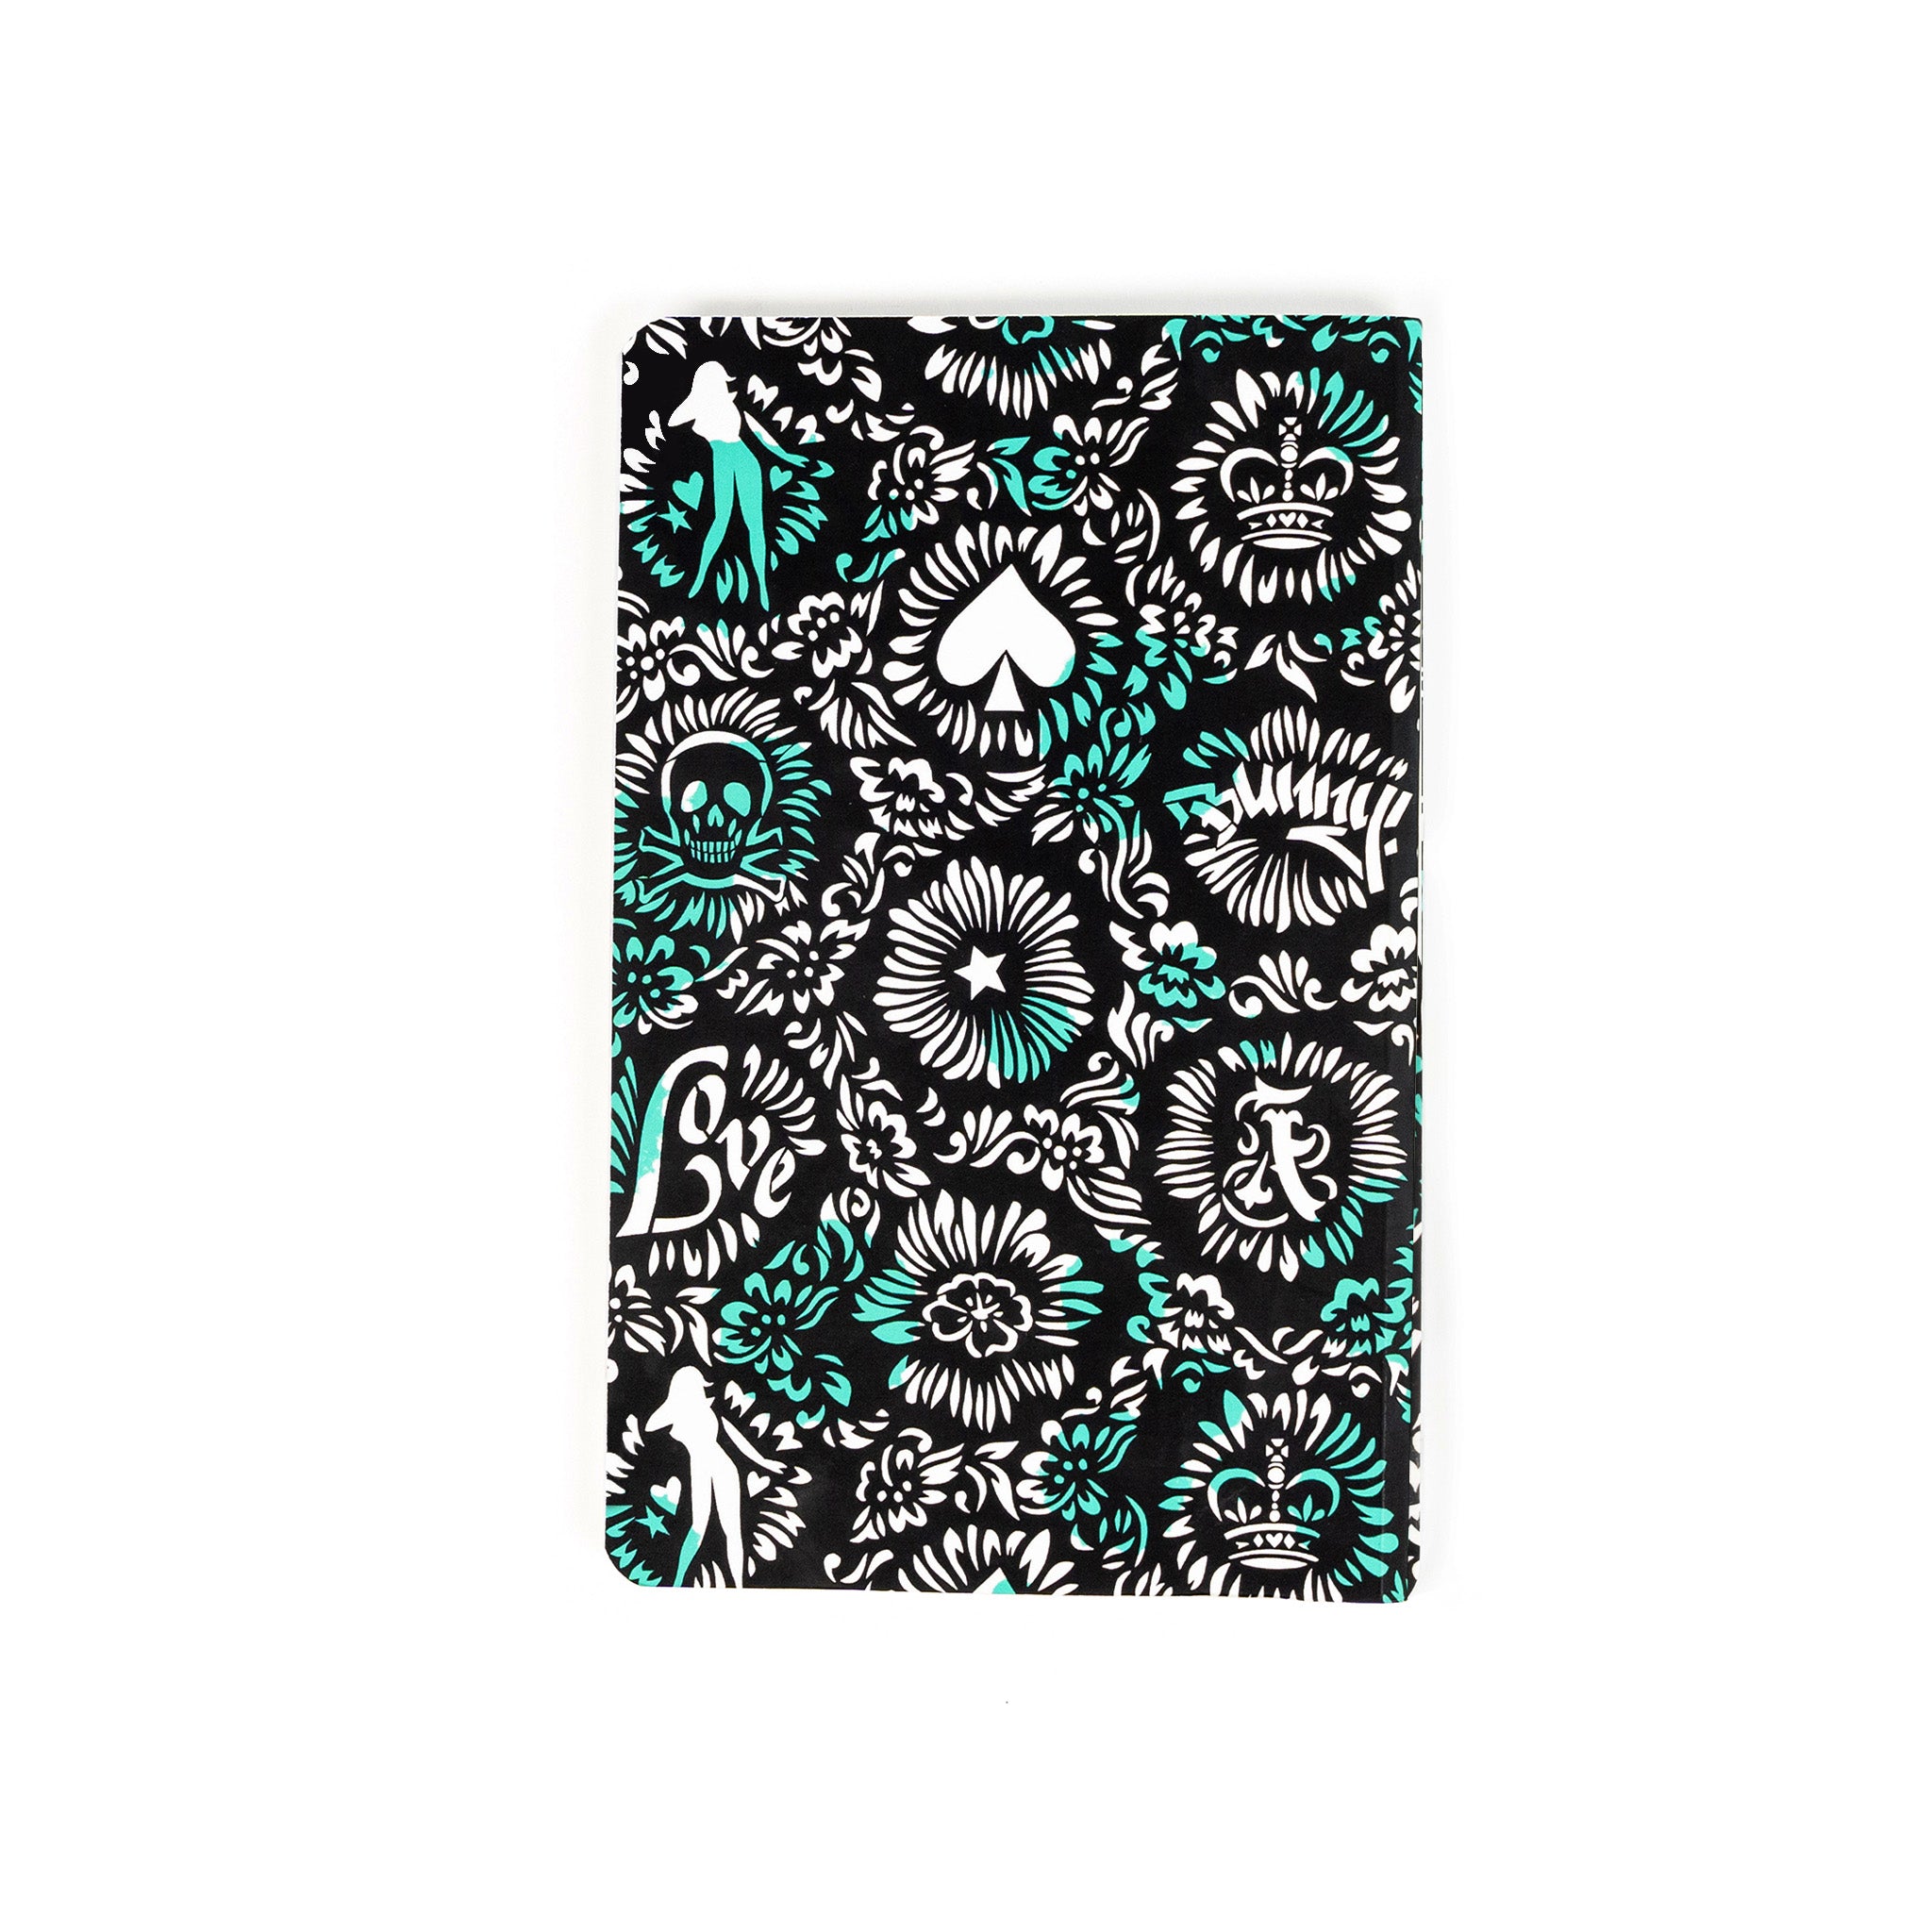 Aiko SIGNATURE PATTERN / TEAL Notebook